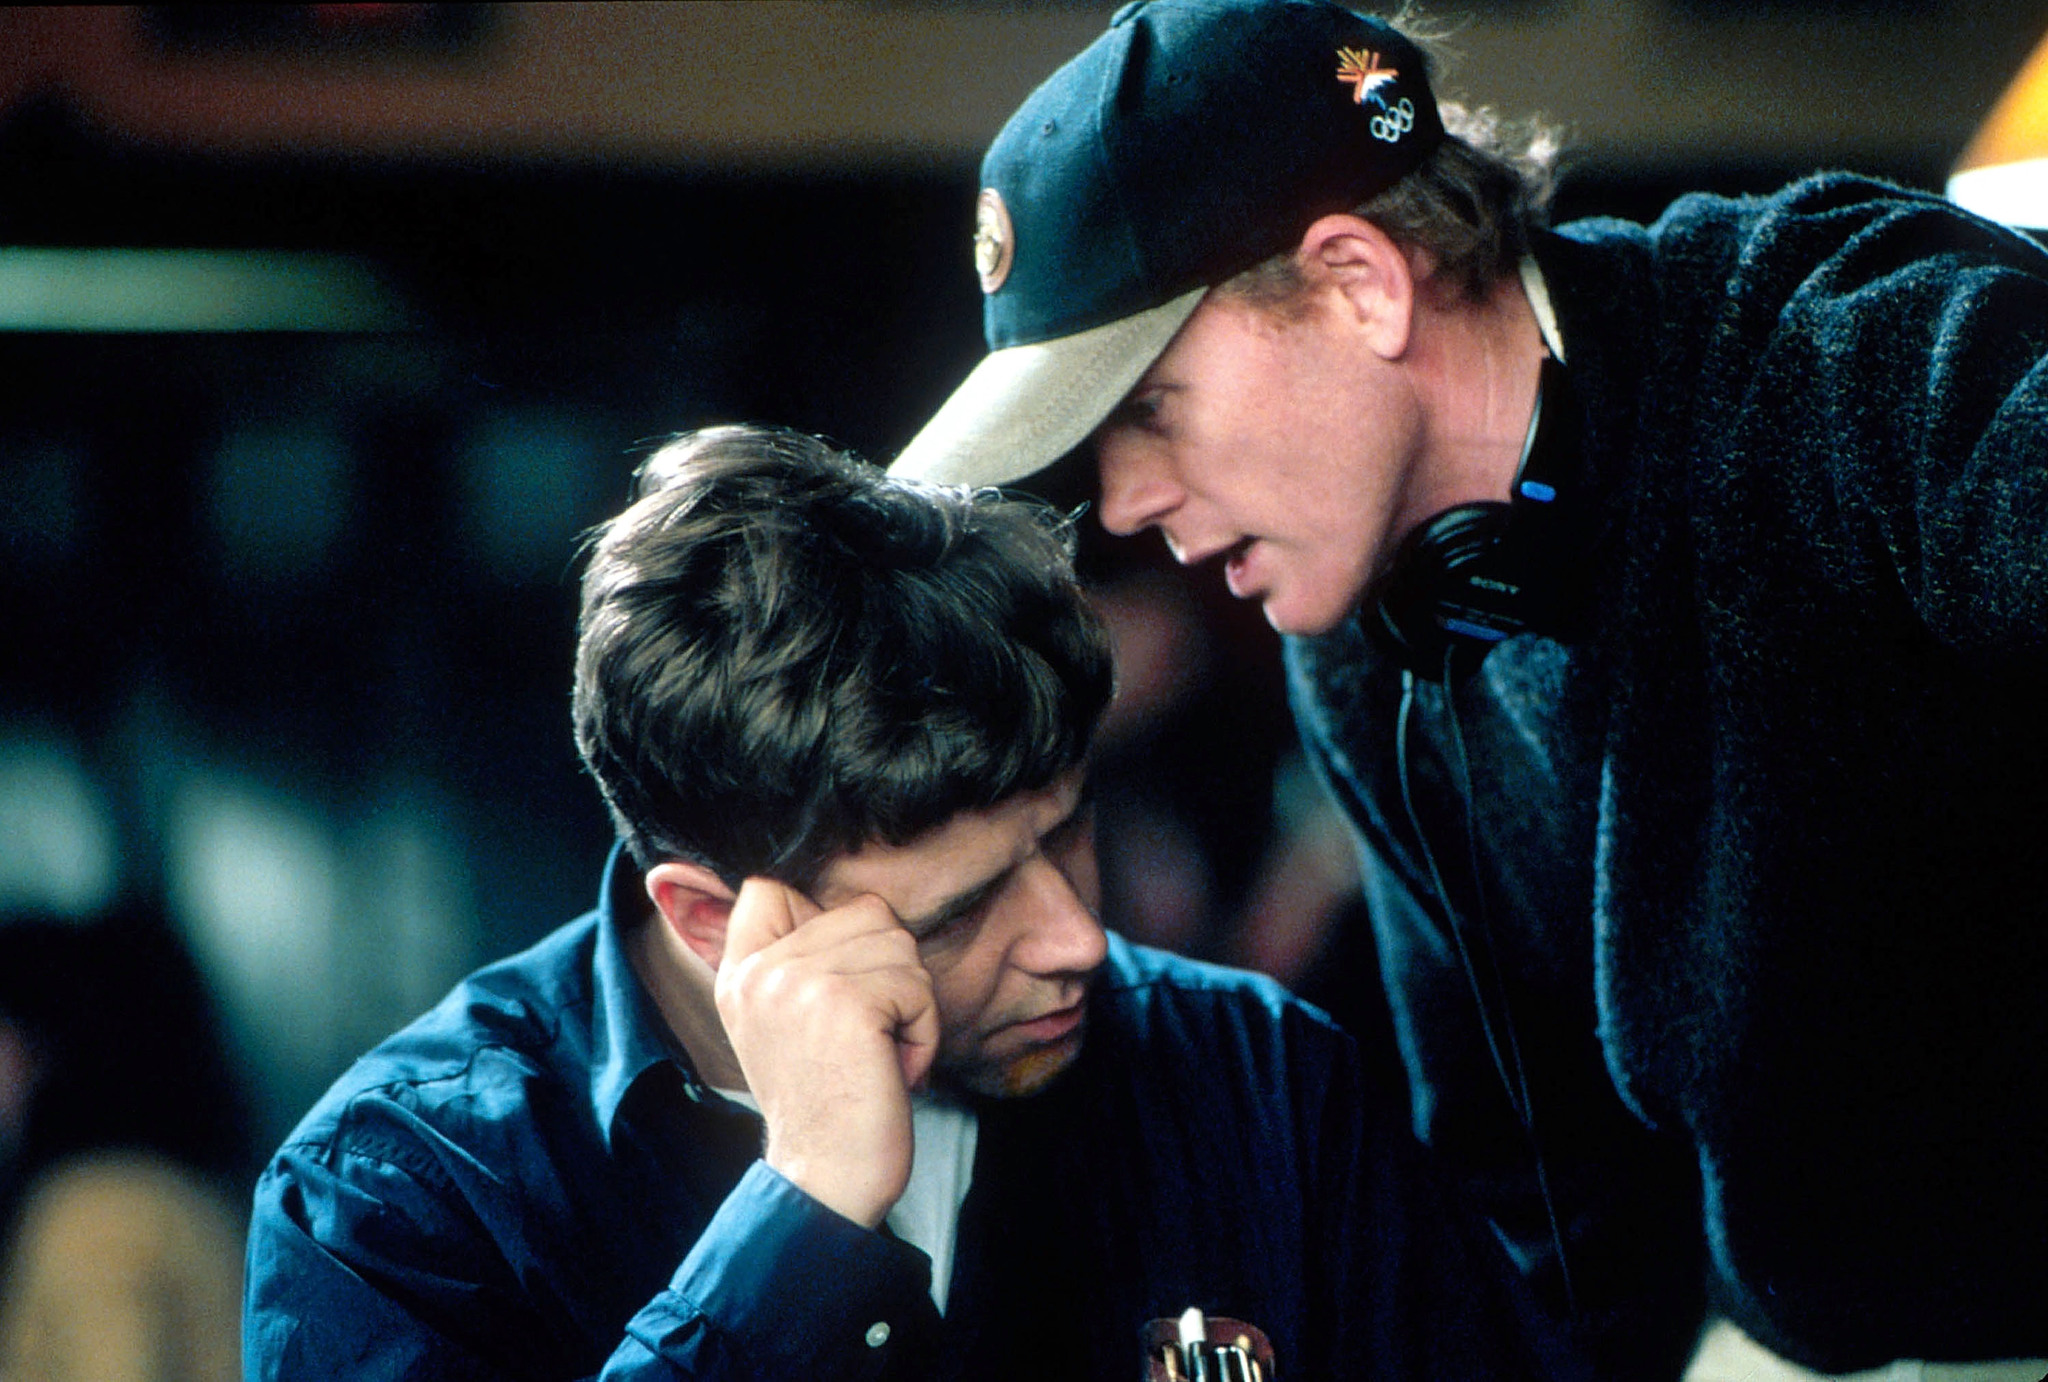 Russell Crowe and Ron Howard in Nuostabus protas (2001)